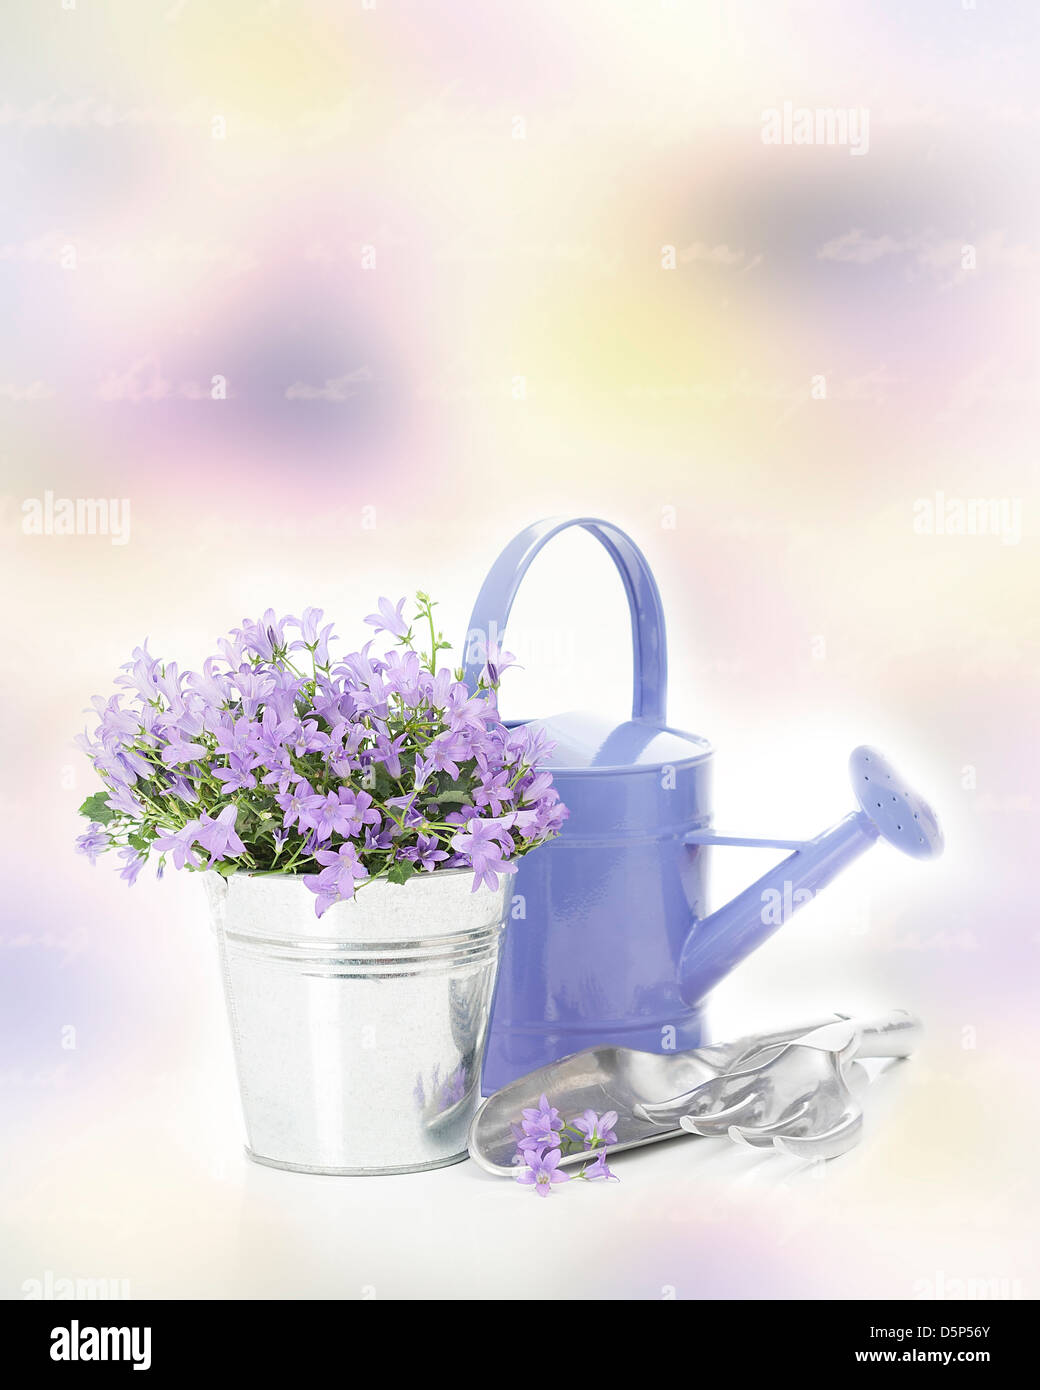 Campanula flowers in pot with garden tools Stock Photo